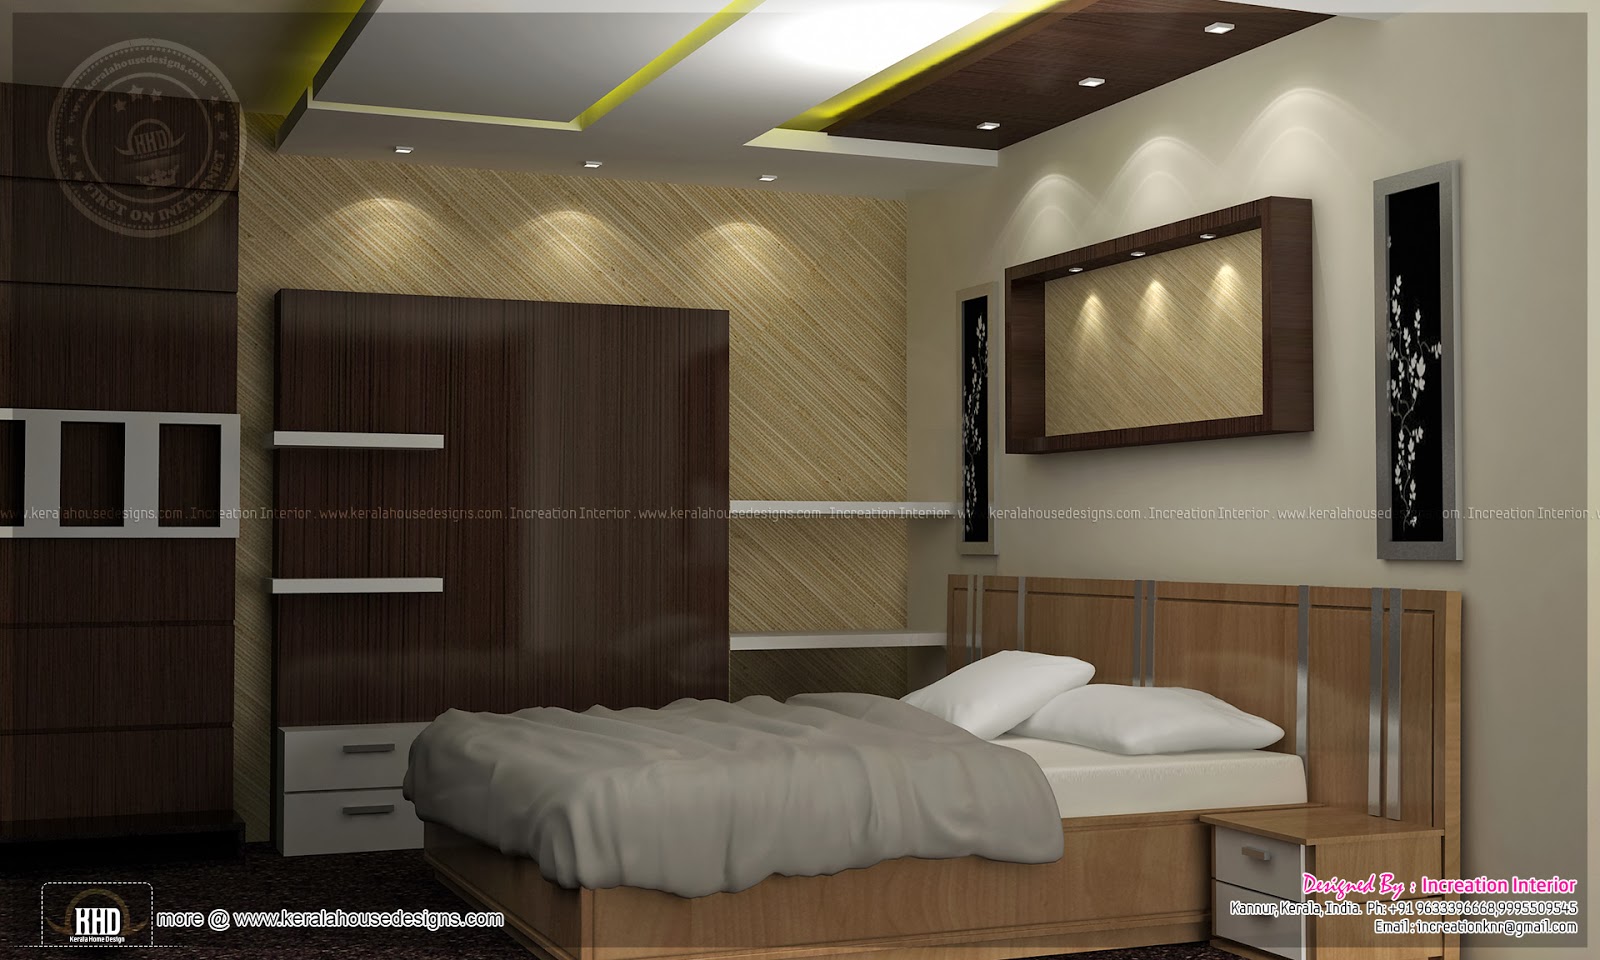  Bedroom  interior  designs  Indian House  Plans